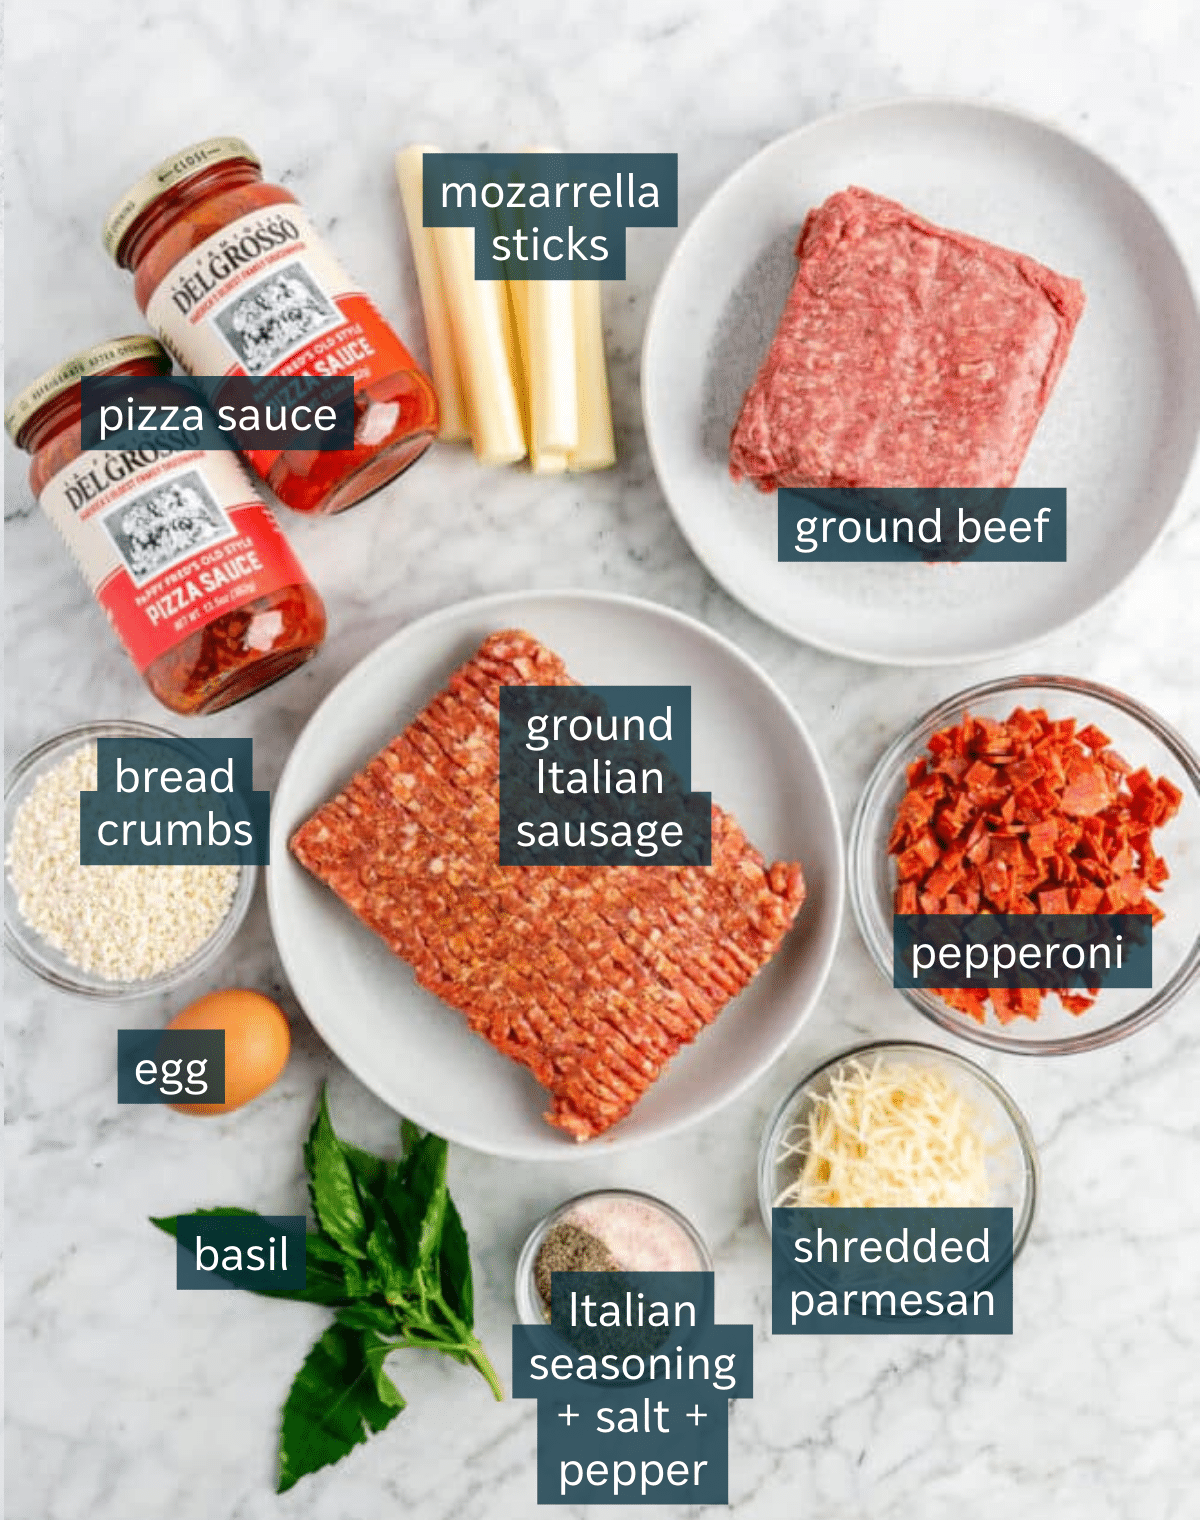 Ingredients for pepperoni meatballs sit in a variety of bowls on a marbled countertop.